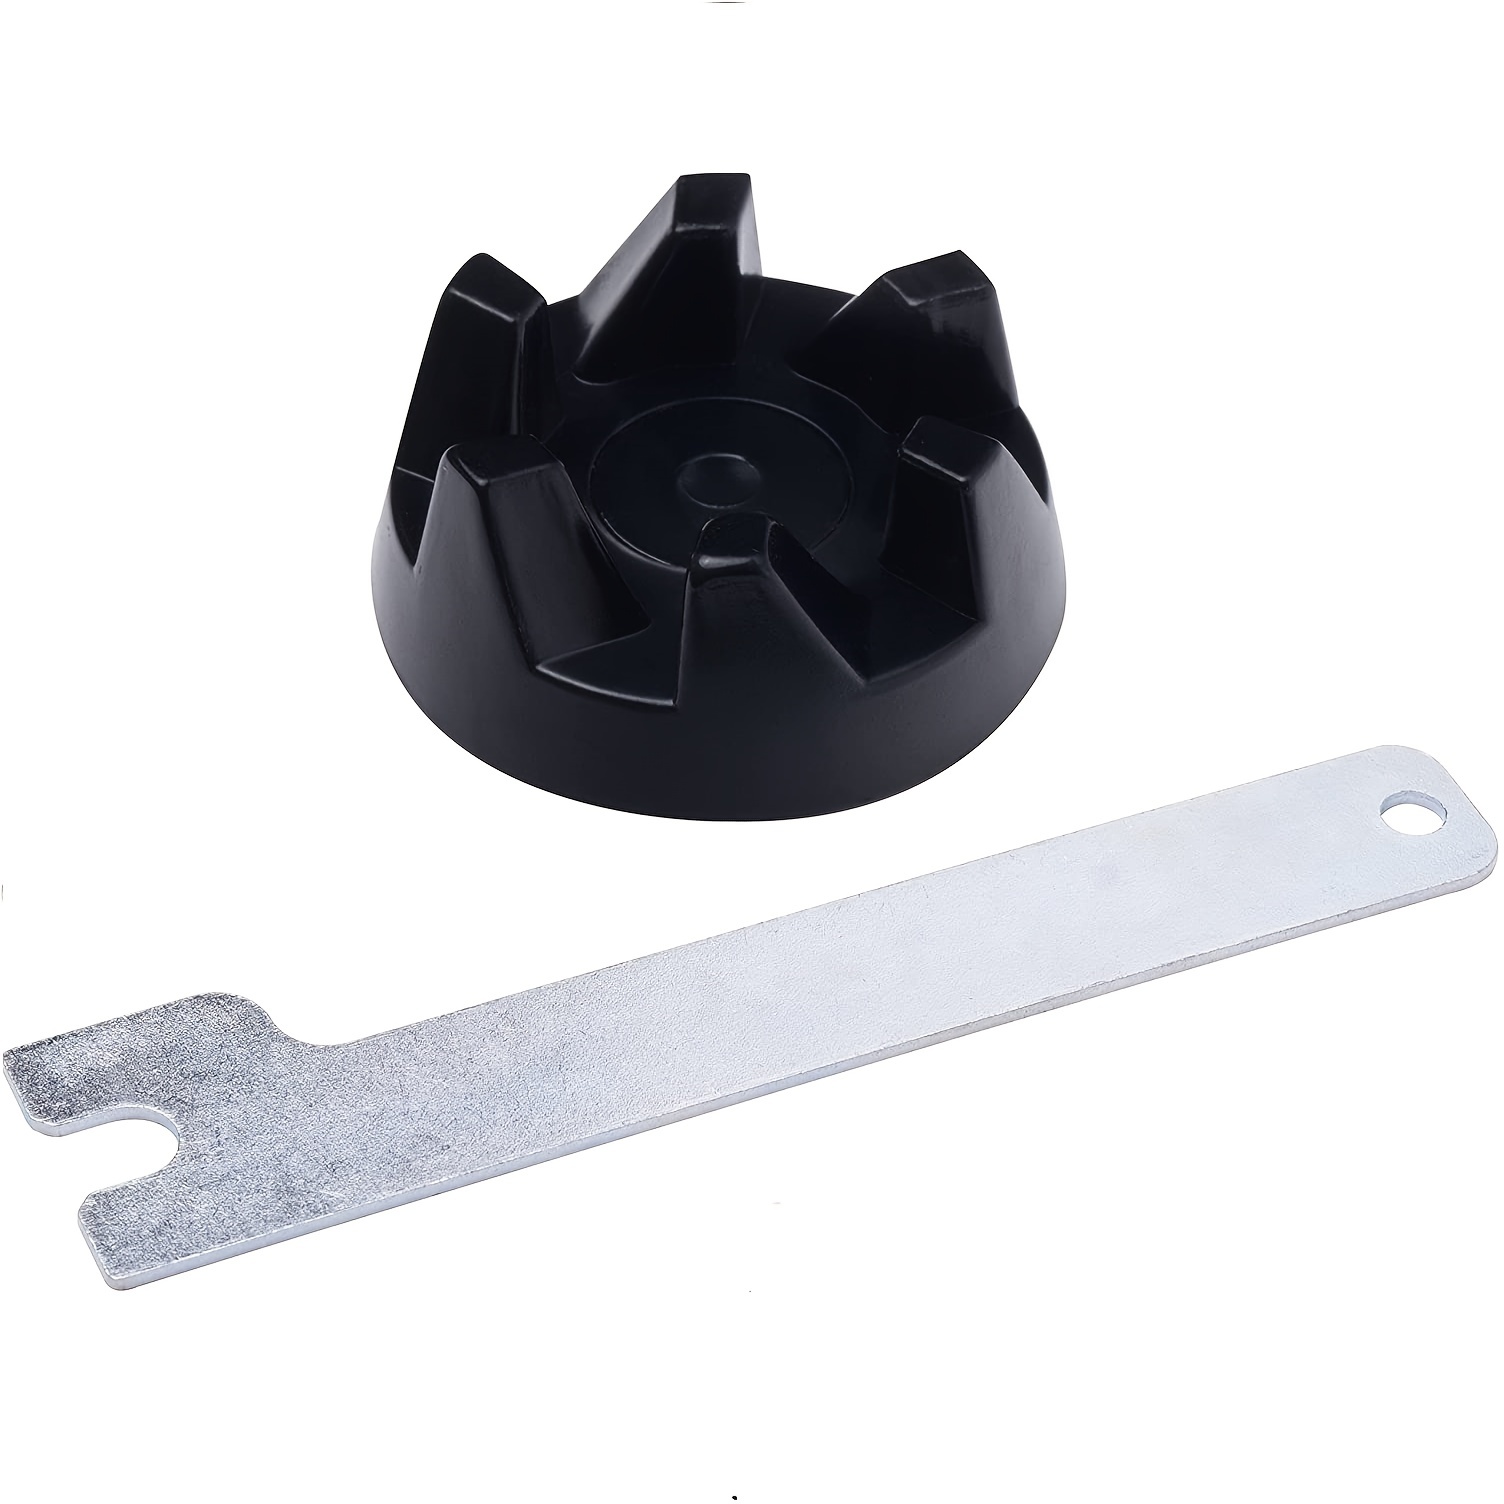 9704230 Blender Coupler with Spanner Kit Replacement Parts Compatible with  KitchenAid KSB5WH KSB5 KSB3 Driver